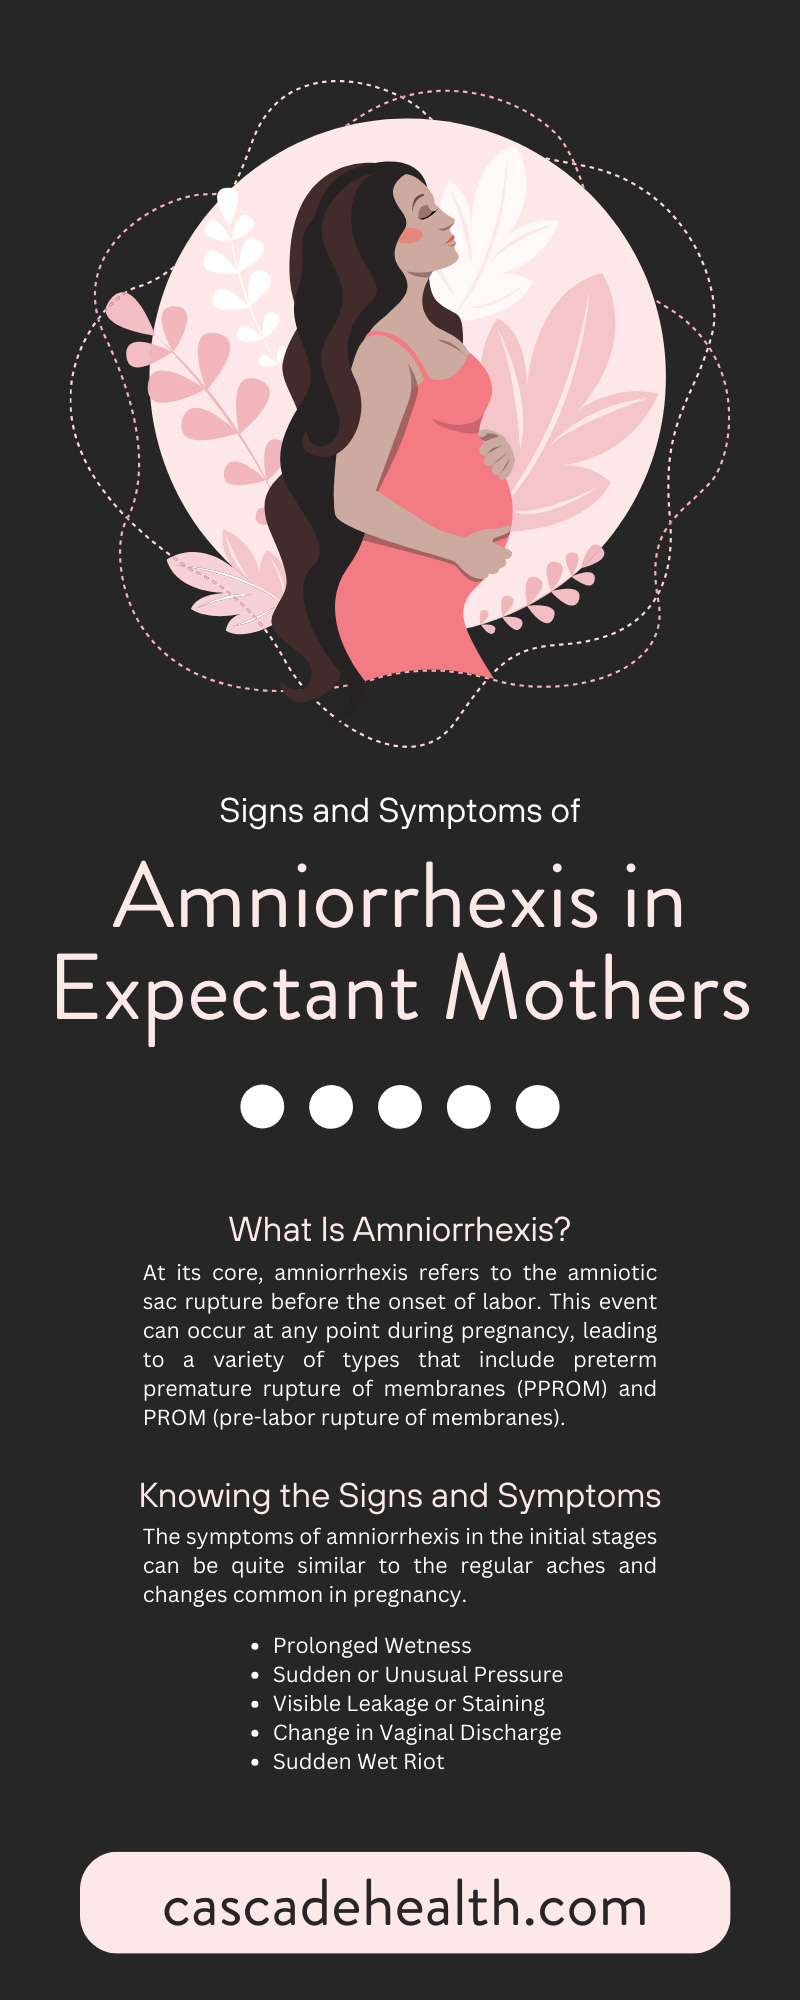 Signs and Symptoms of Amniorrhexis in Expectant Mothers